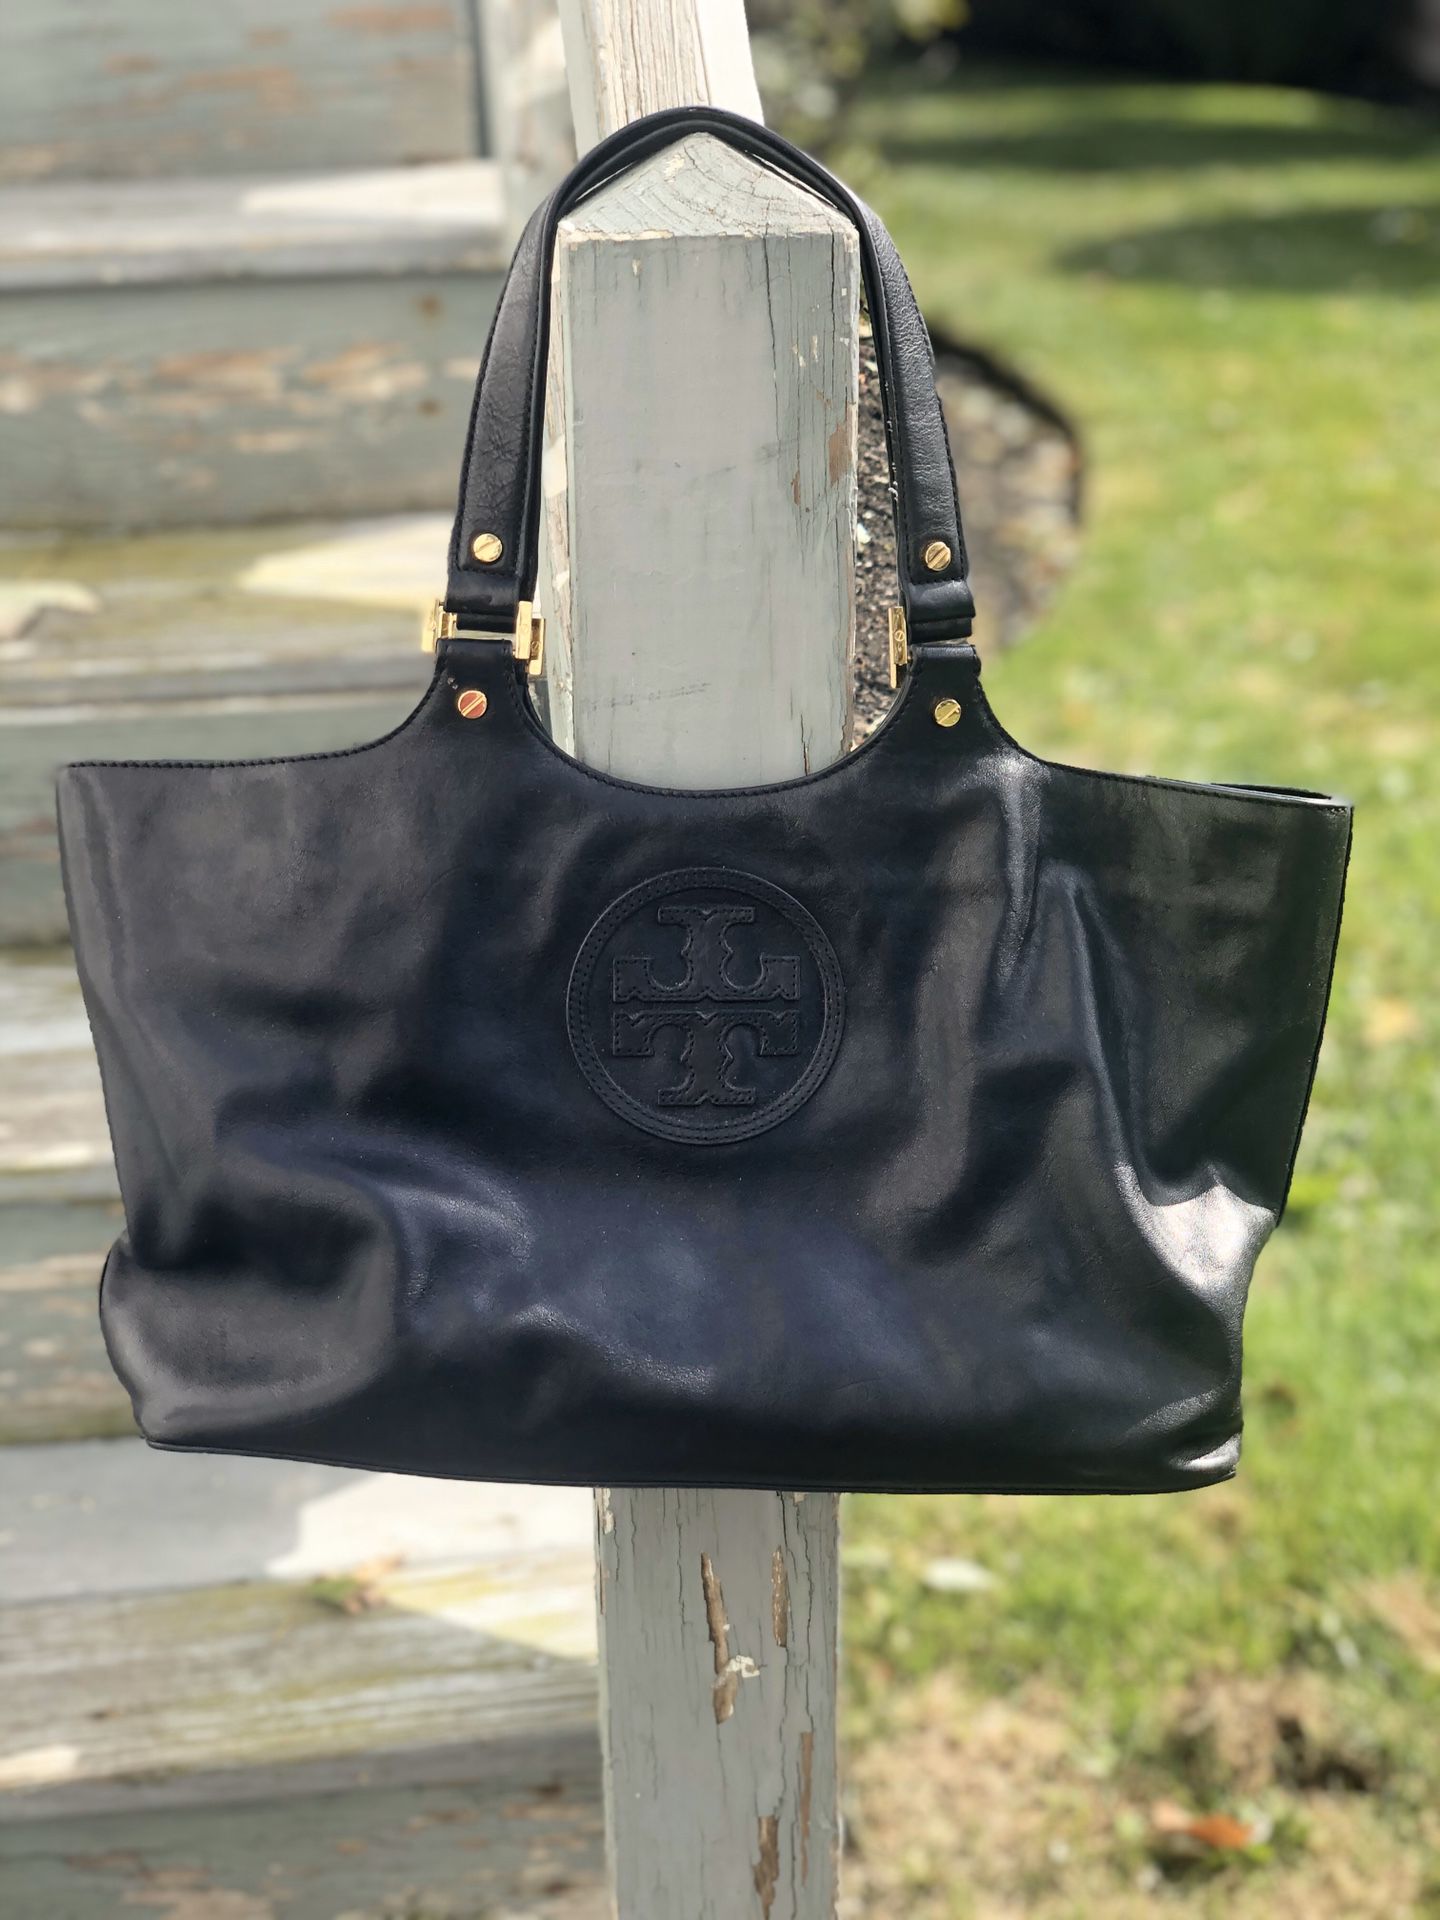 Authentic Tory Burch Leather Tote Bag Black